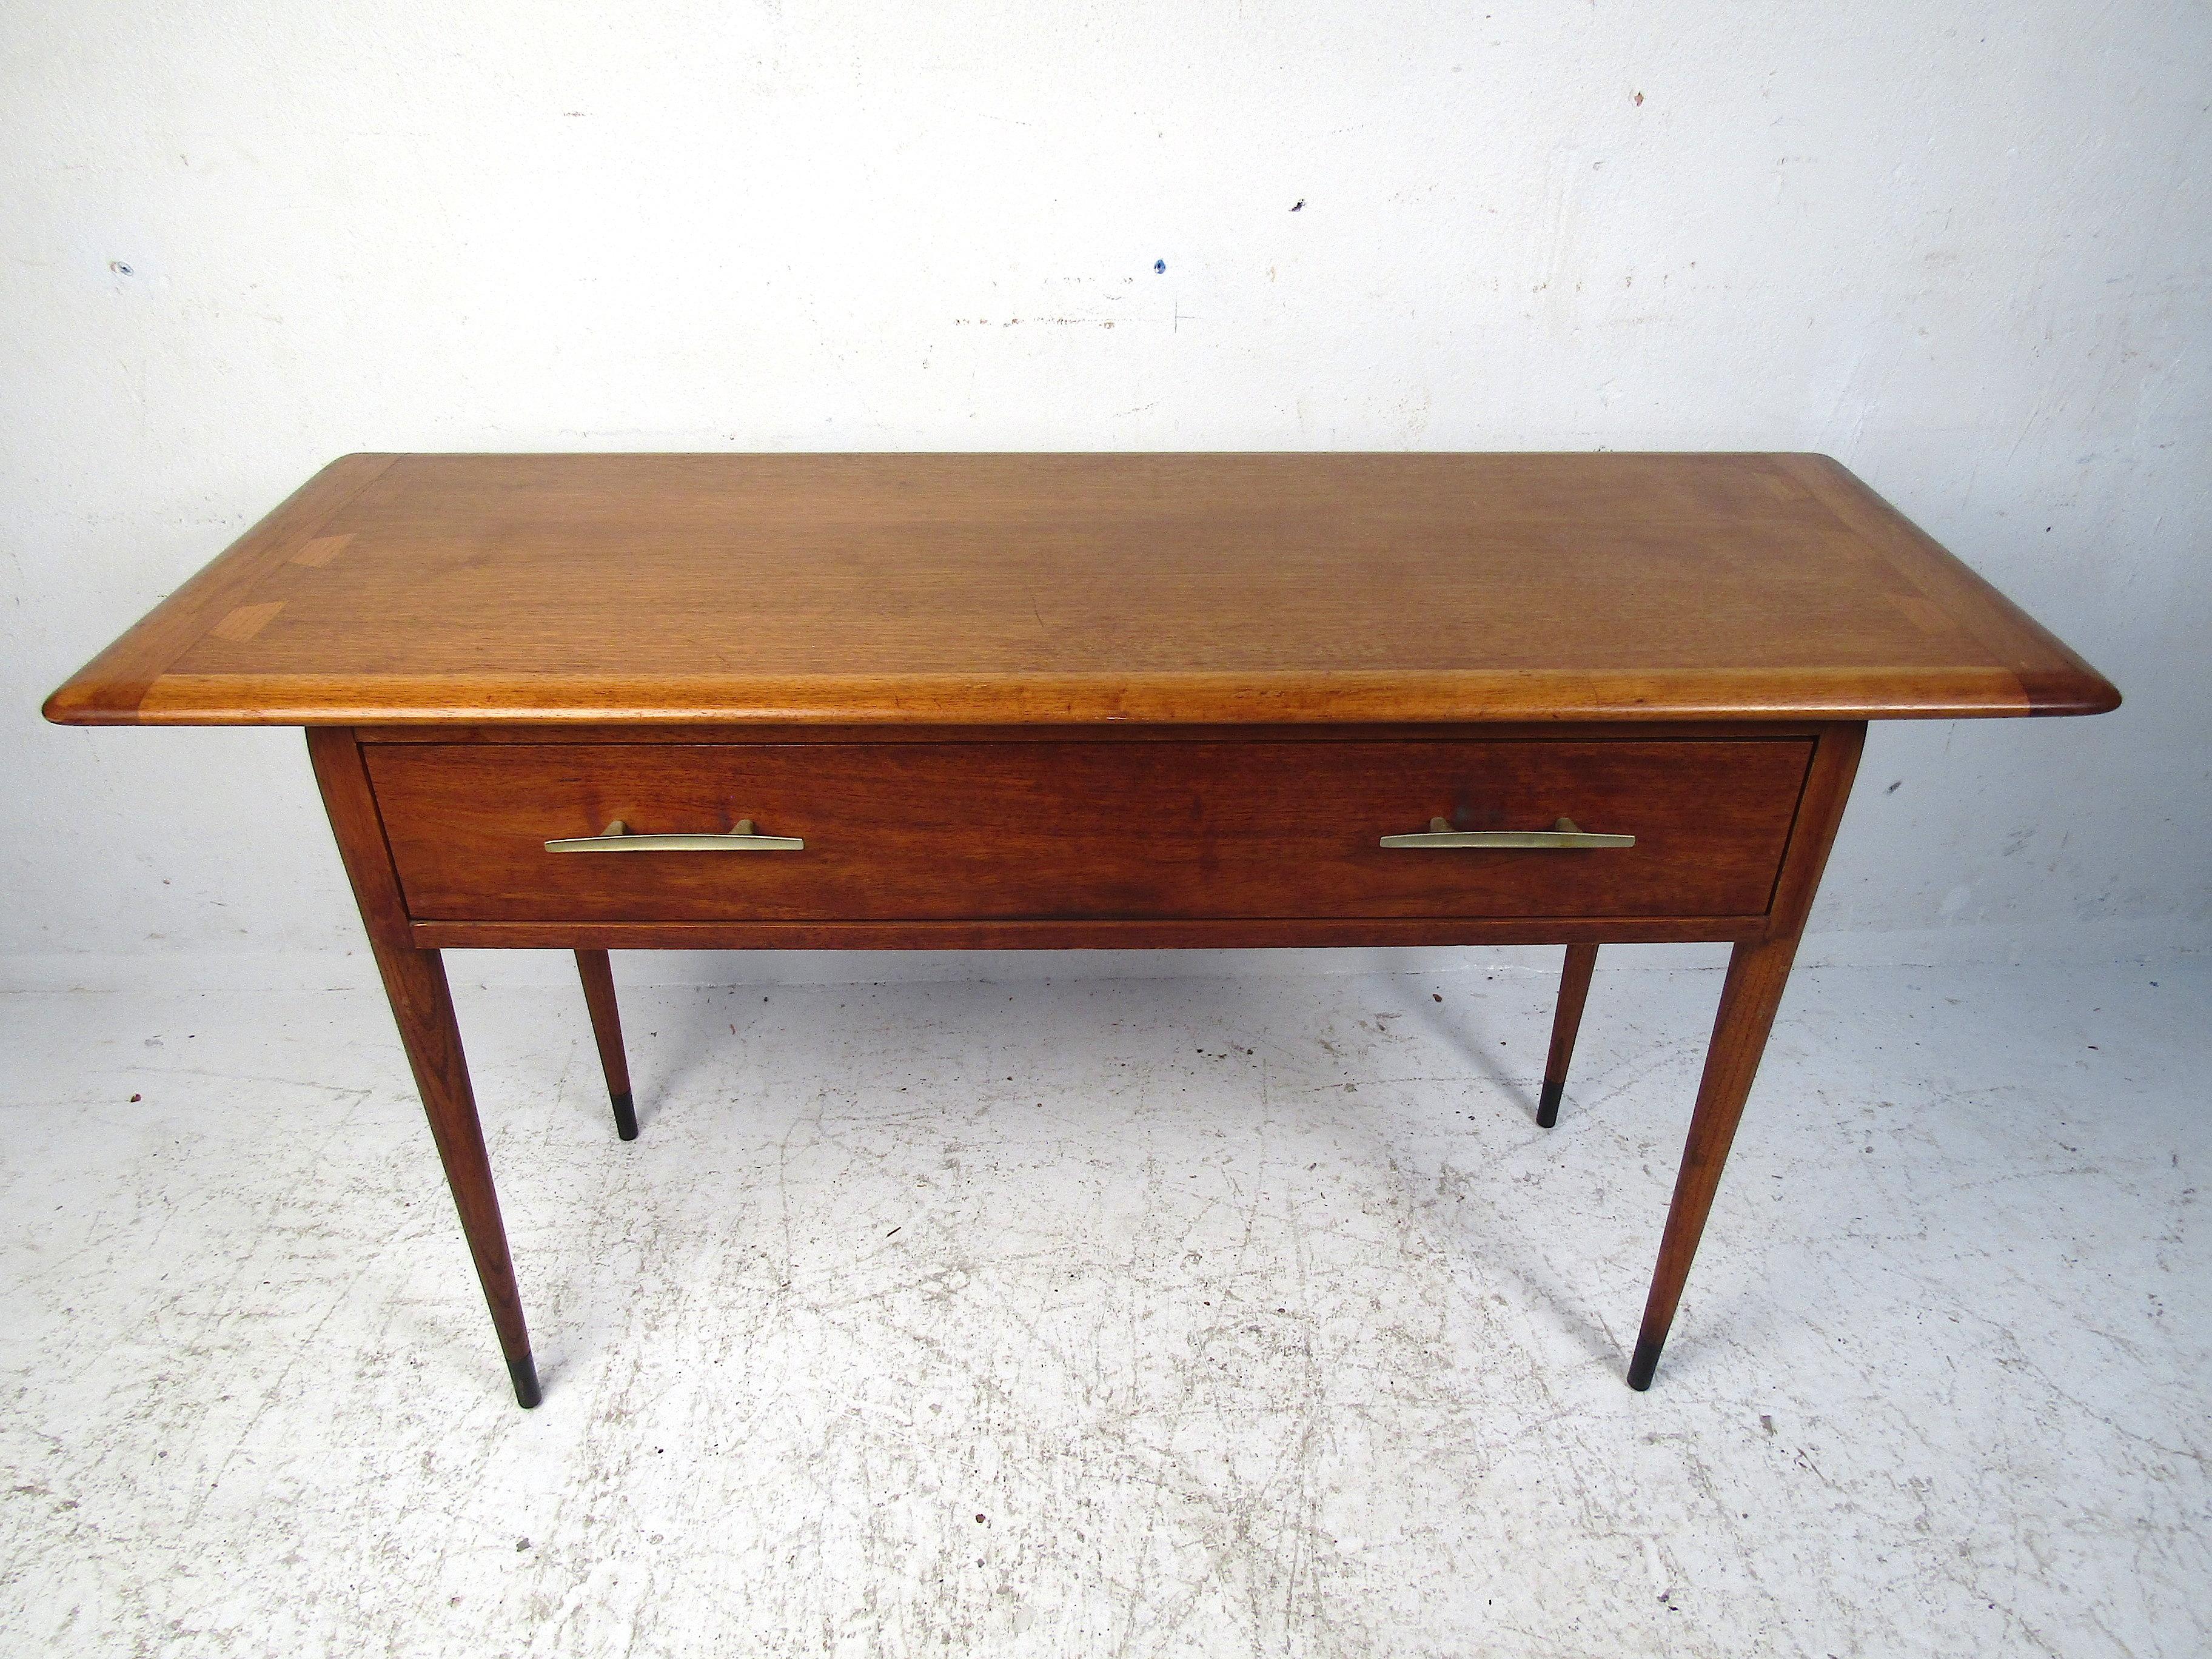 Stylish midcentury console table manufactured by Lane Furniture Co. Good-looking table with tapered legs, half-bowtie inlays on the edges of the tabletop, and dovetail jointed drawers. Please confirm item location with dealer (NJ or NY).